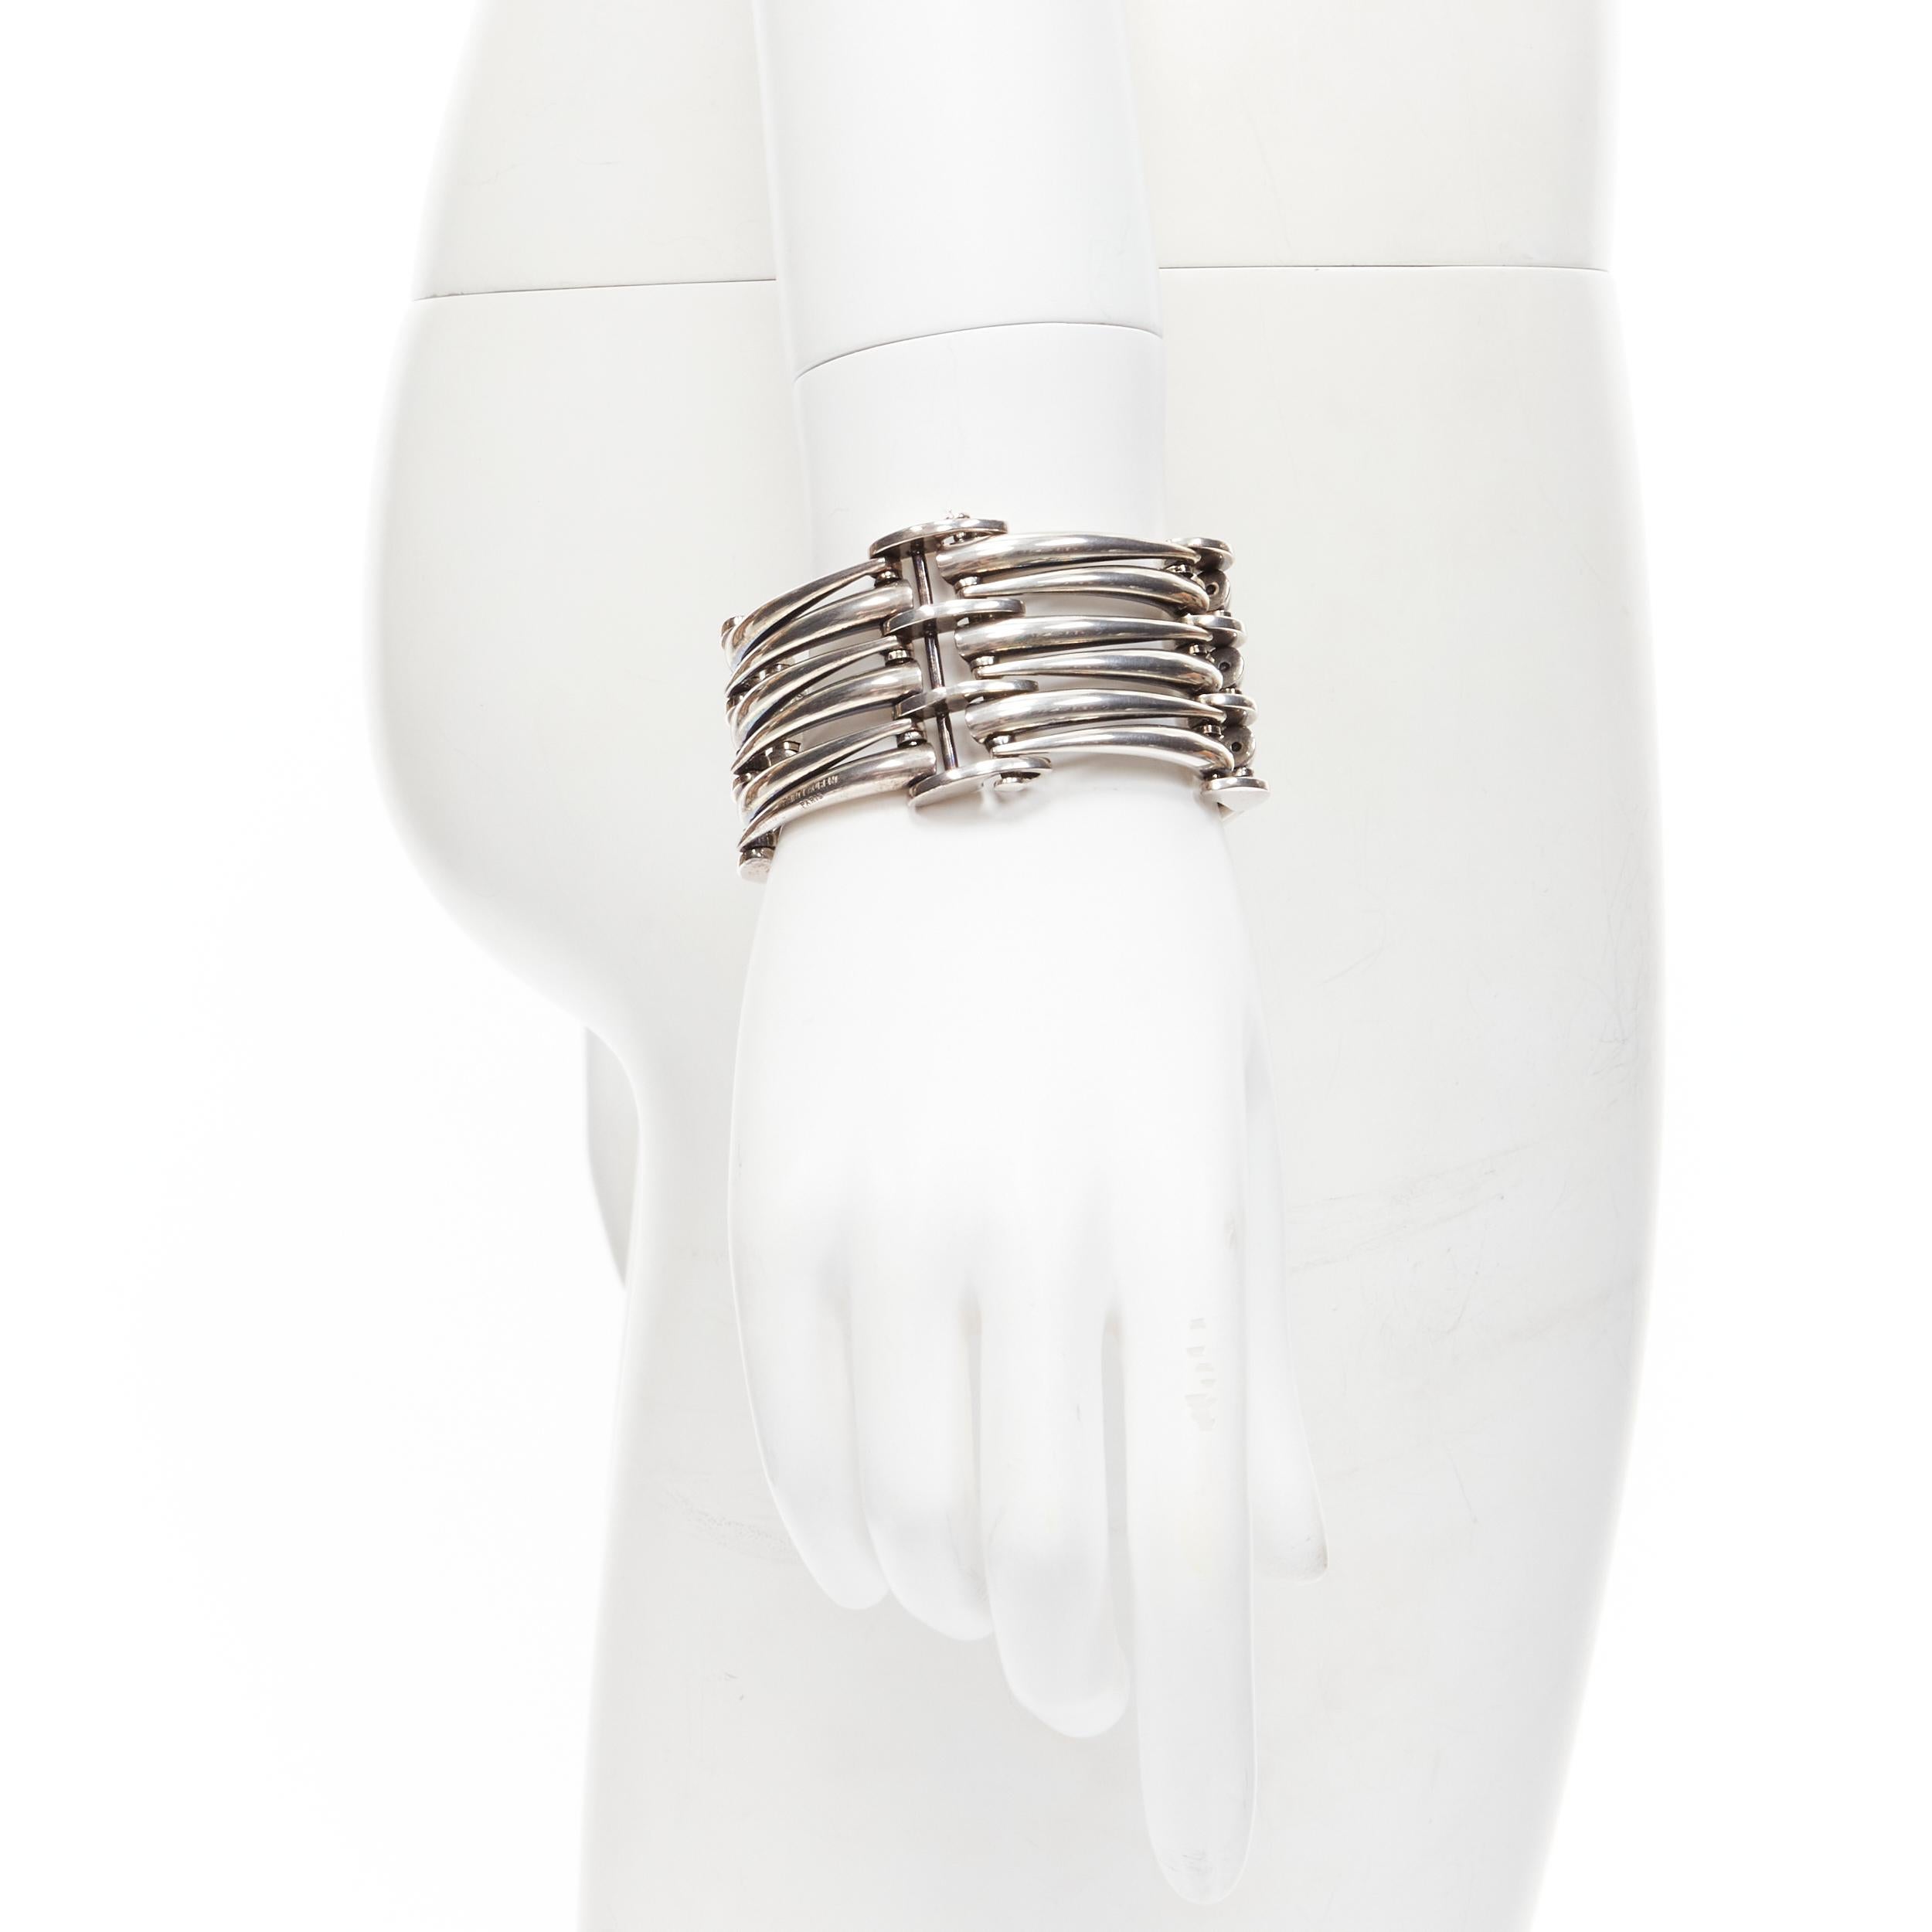 SAINT LAURENT Hedi Slimane silver metal claw clasp wide bracelet cuff 
Reference: TGAS/B01778 
Brand: Saint Laurent 
Designer: Hedi Slimane 
Material: Metal 
Color: Silver 
Pattern: Solid 
Closure: Clasp 
Extra Detail: Design by Hedi Slimane.